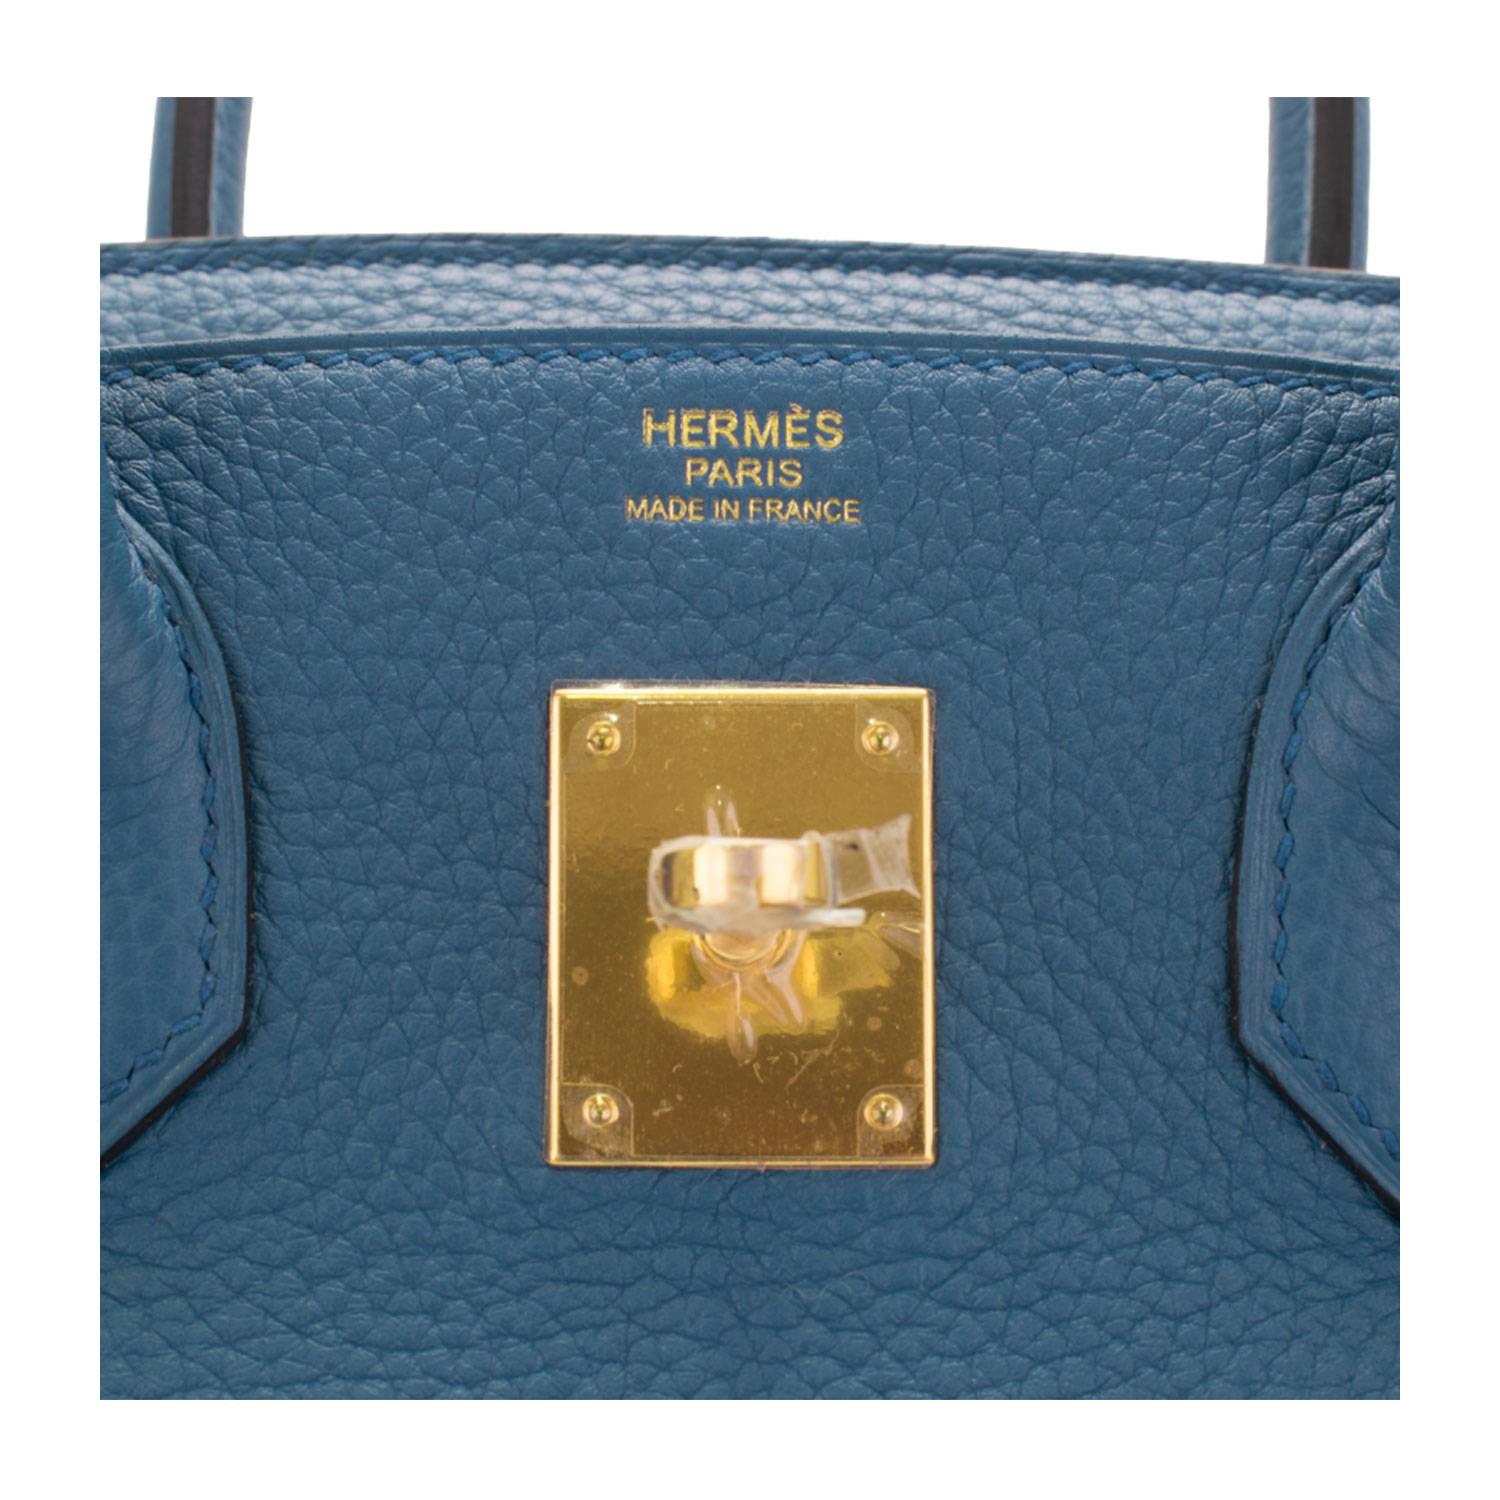 Hermes Birkin 30 T. Clemence Leather R2 Blue Agate NEW COLOR Gold Hardware 2016 2